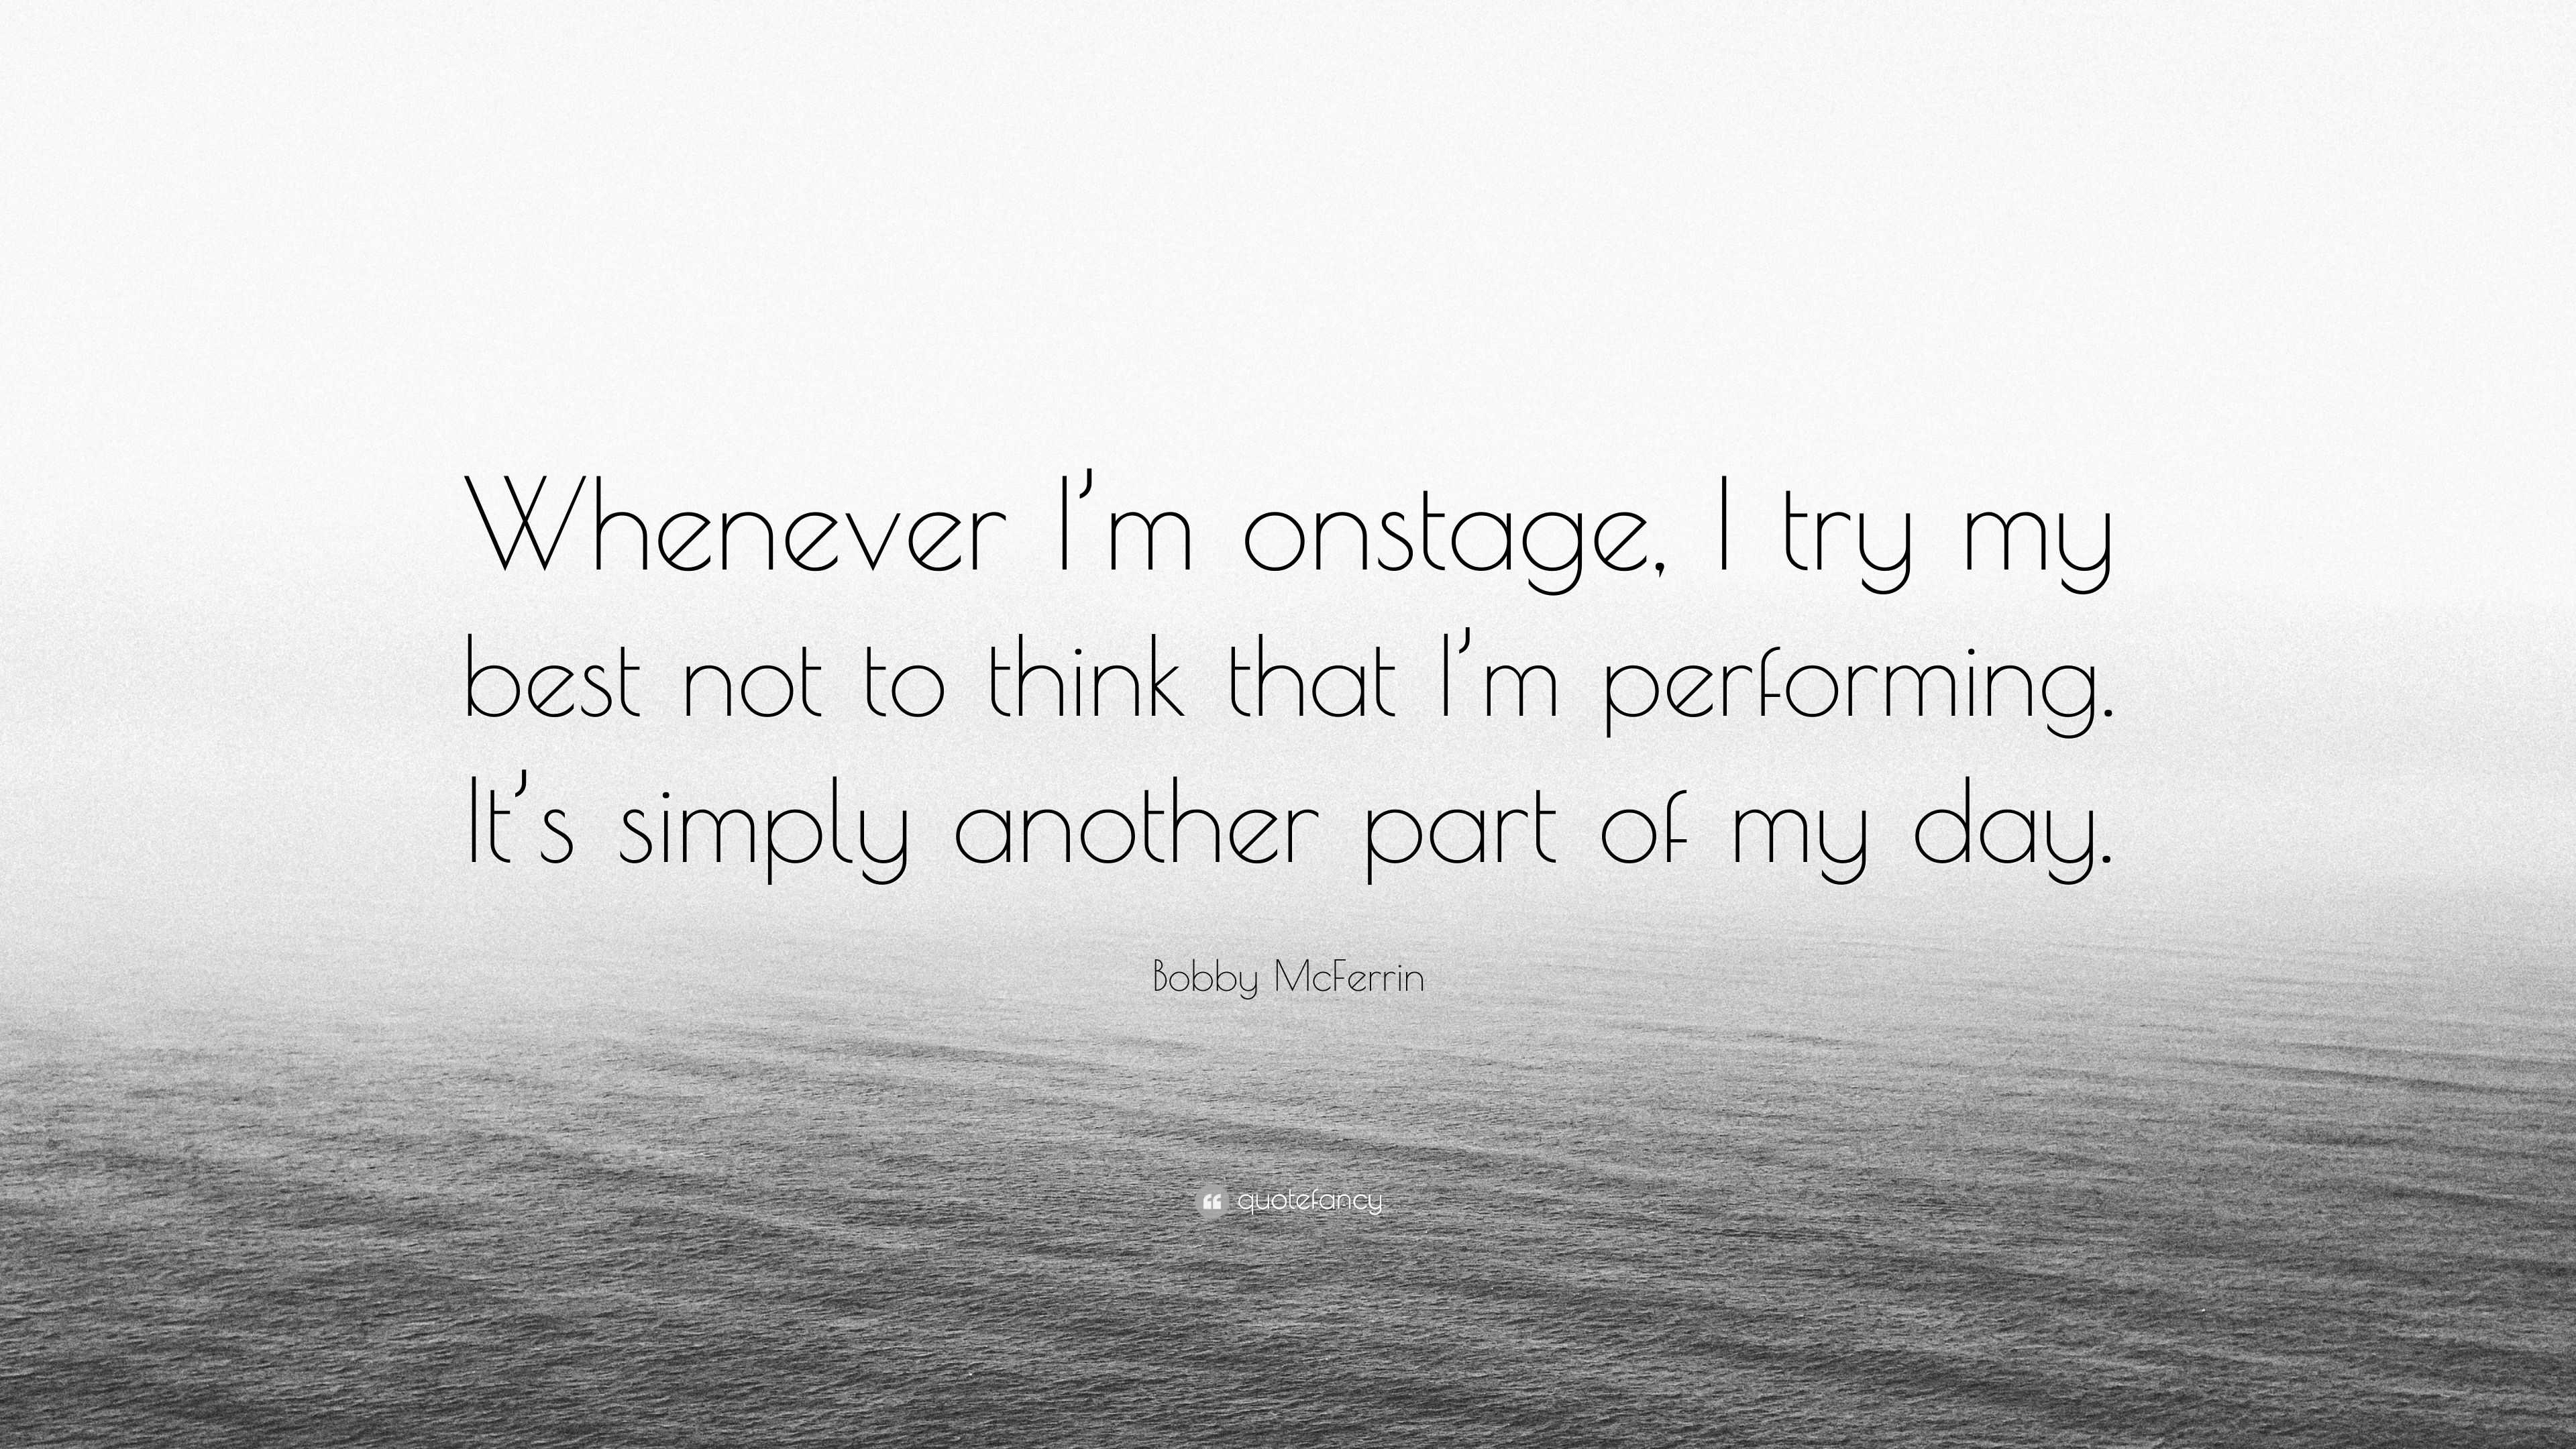 Bobby McFerrin Quote: “Whenever I’m onstage, I try my best not to think ...